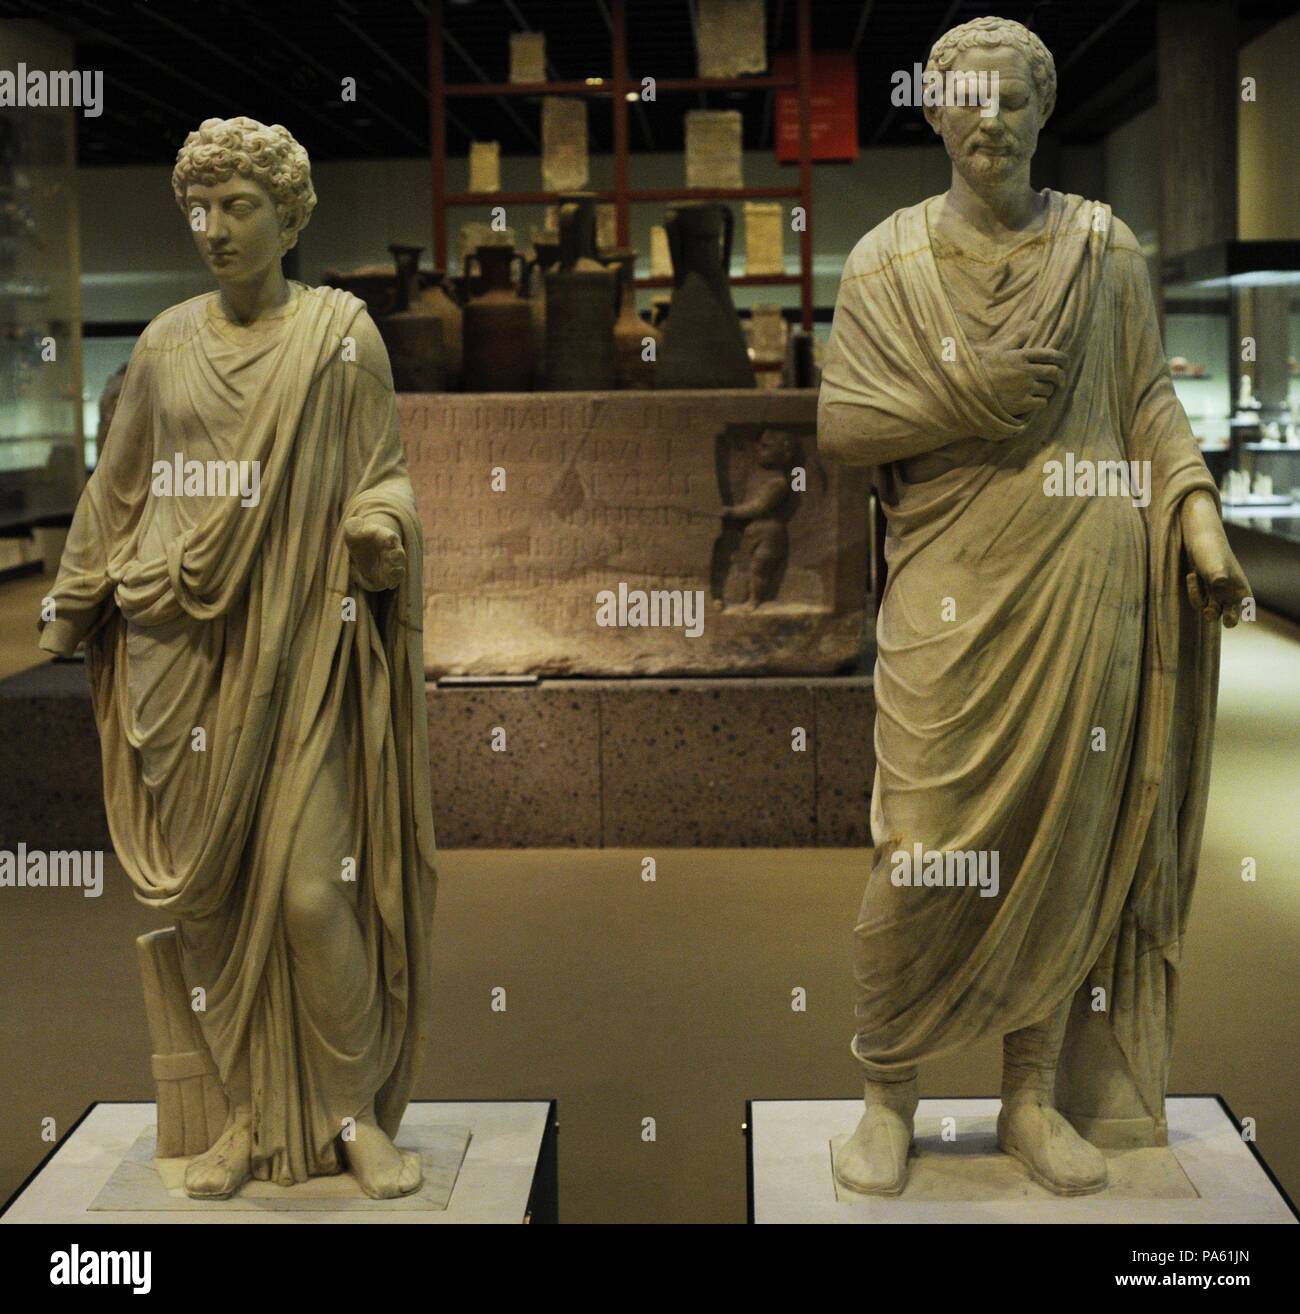 On the left, statue of a Roman citizen of the 2nd century. The head of a young Marcus Aurelius was added later by a Neo-classical sculptor. On the right, statue of a Roman citizen from the end of the 1st century BC, during the Republic Period. The head was later added to depict Demosthenes (384-322 BC). Marble. Roman-Germanic Museum. Cologne. Germany. Stock Photo